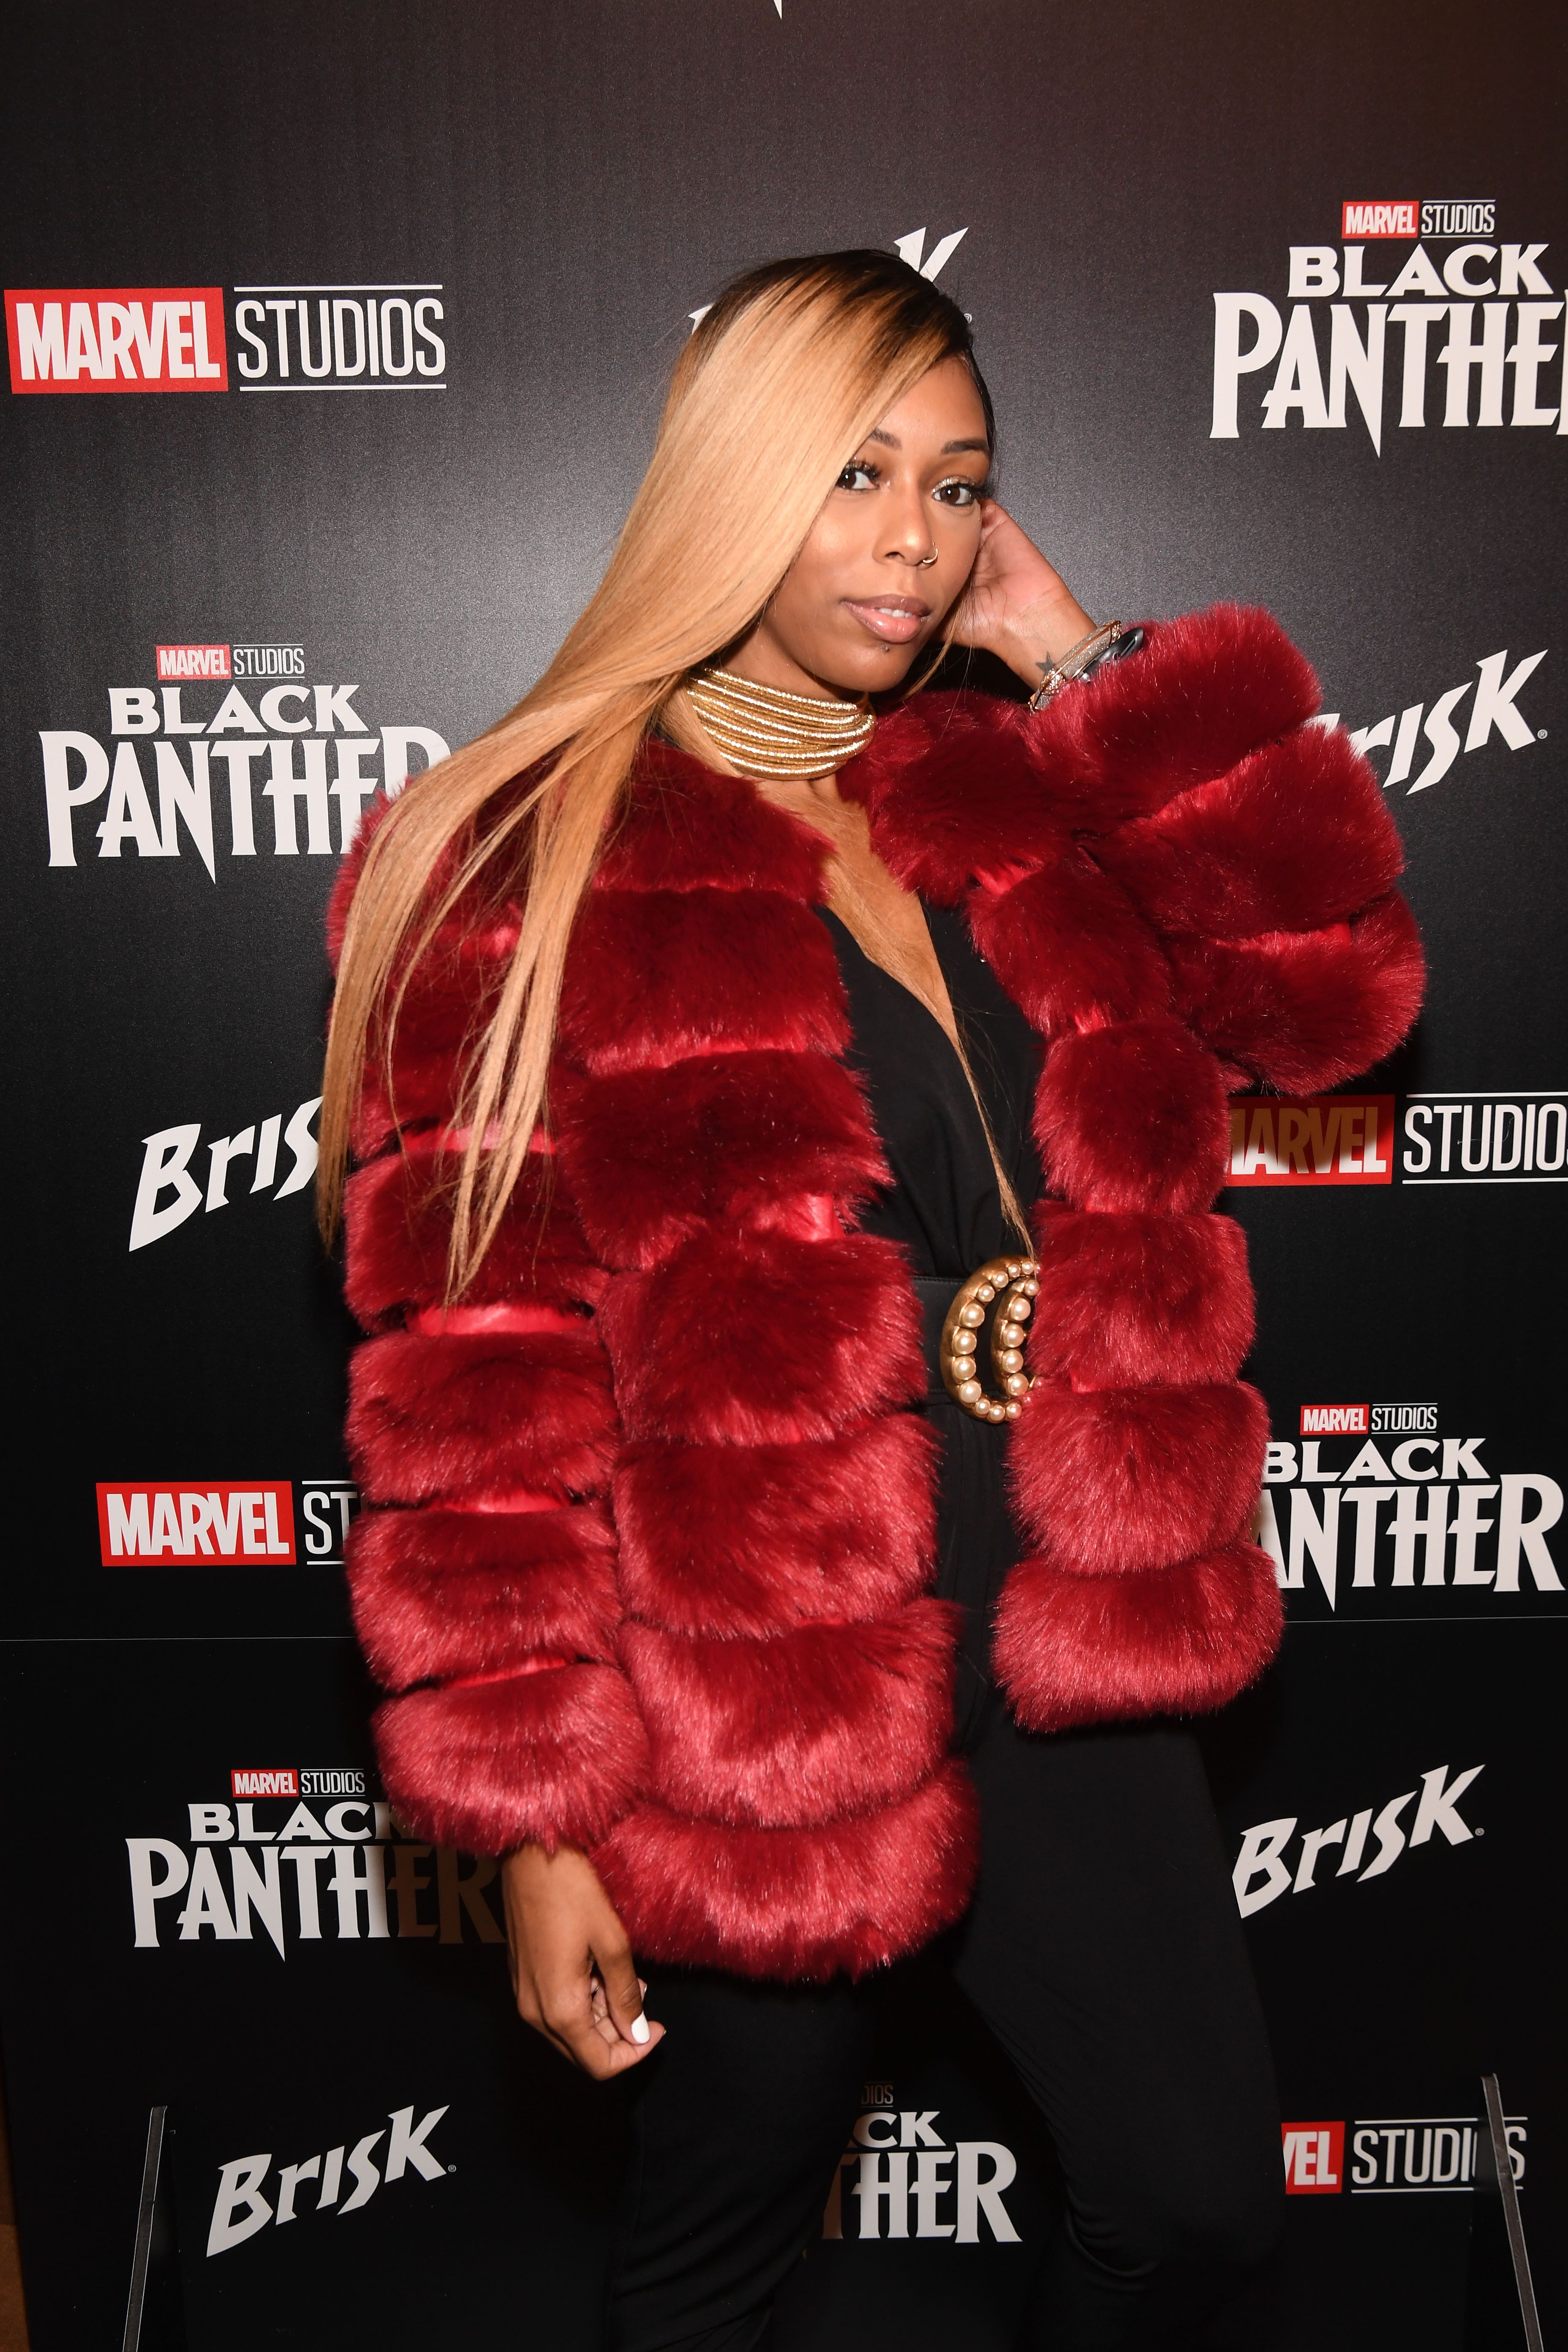 Bambi Benson at the "Black Panther" advanced screening & panel discussion on February 14, 2018 in Atlanta. | Photo: Getty Images